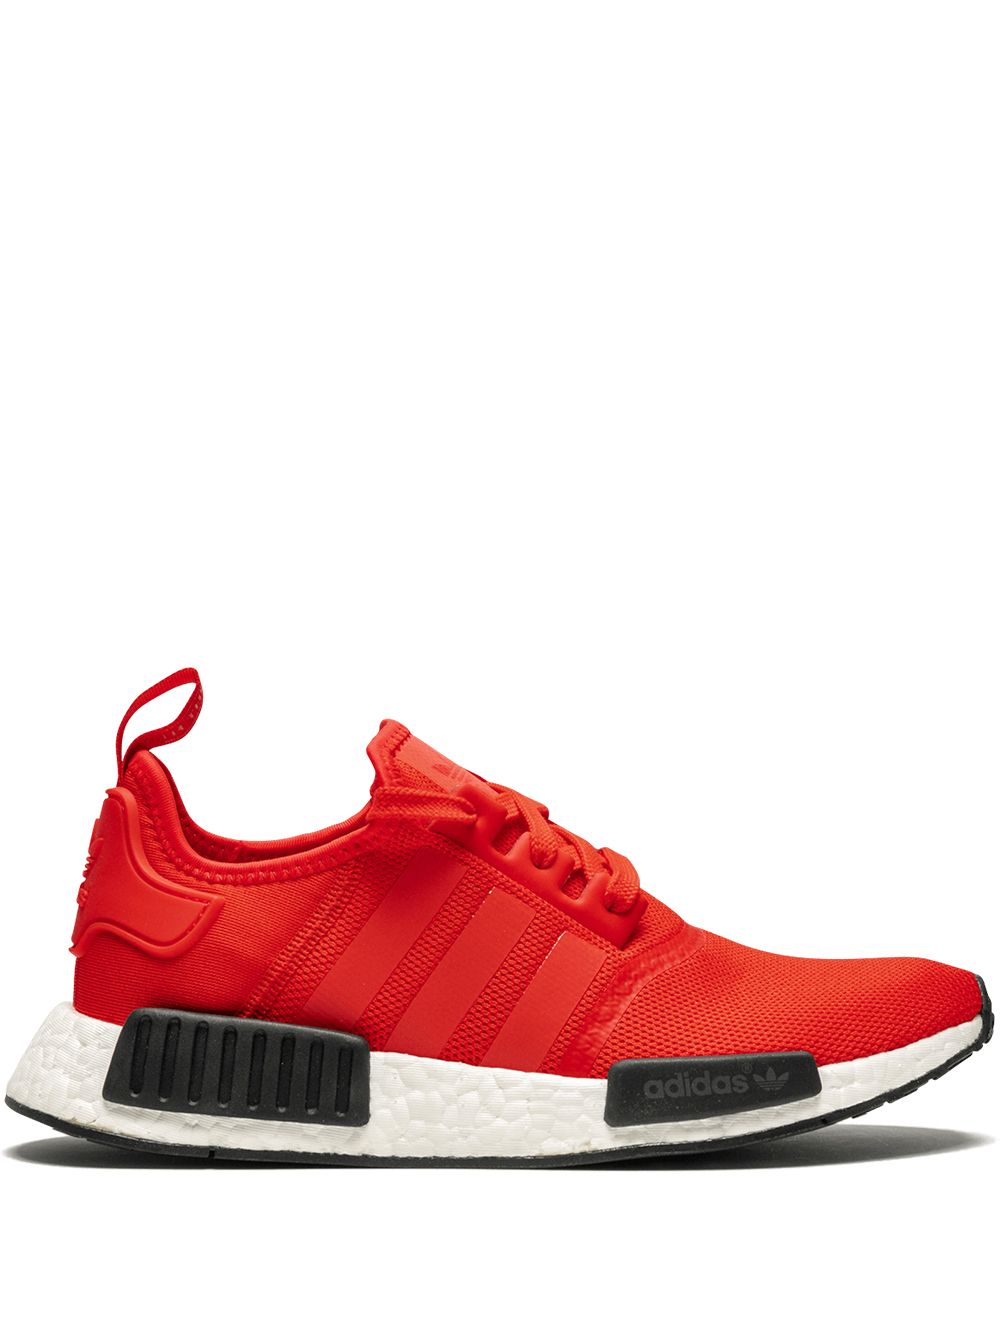 adidas NMD R1 "Bred Pack" sneakers von adidas